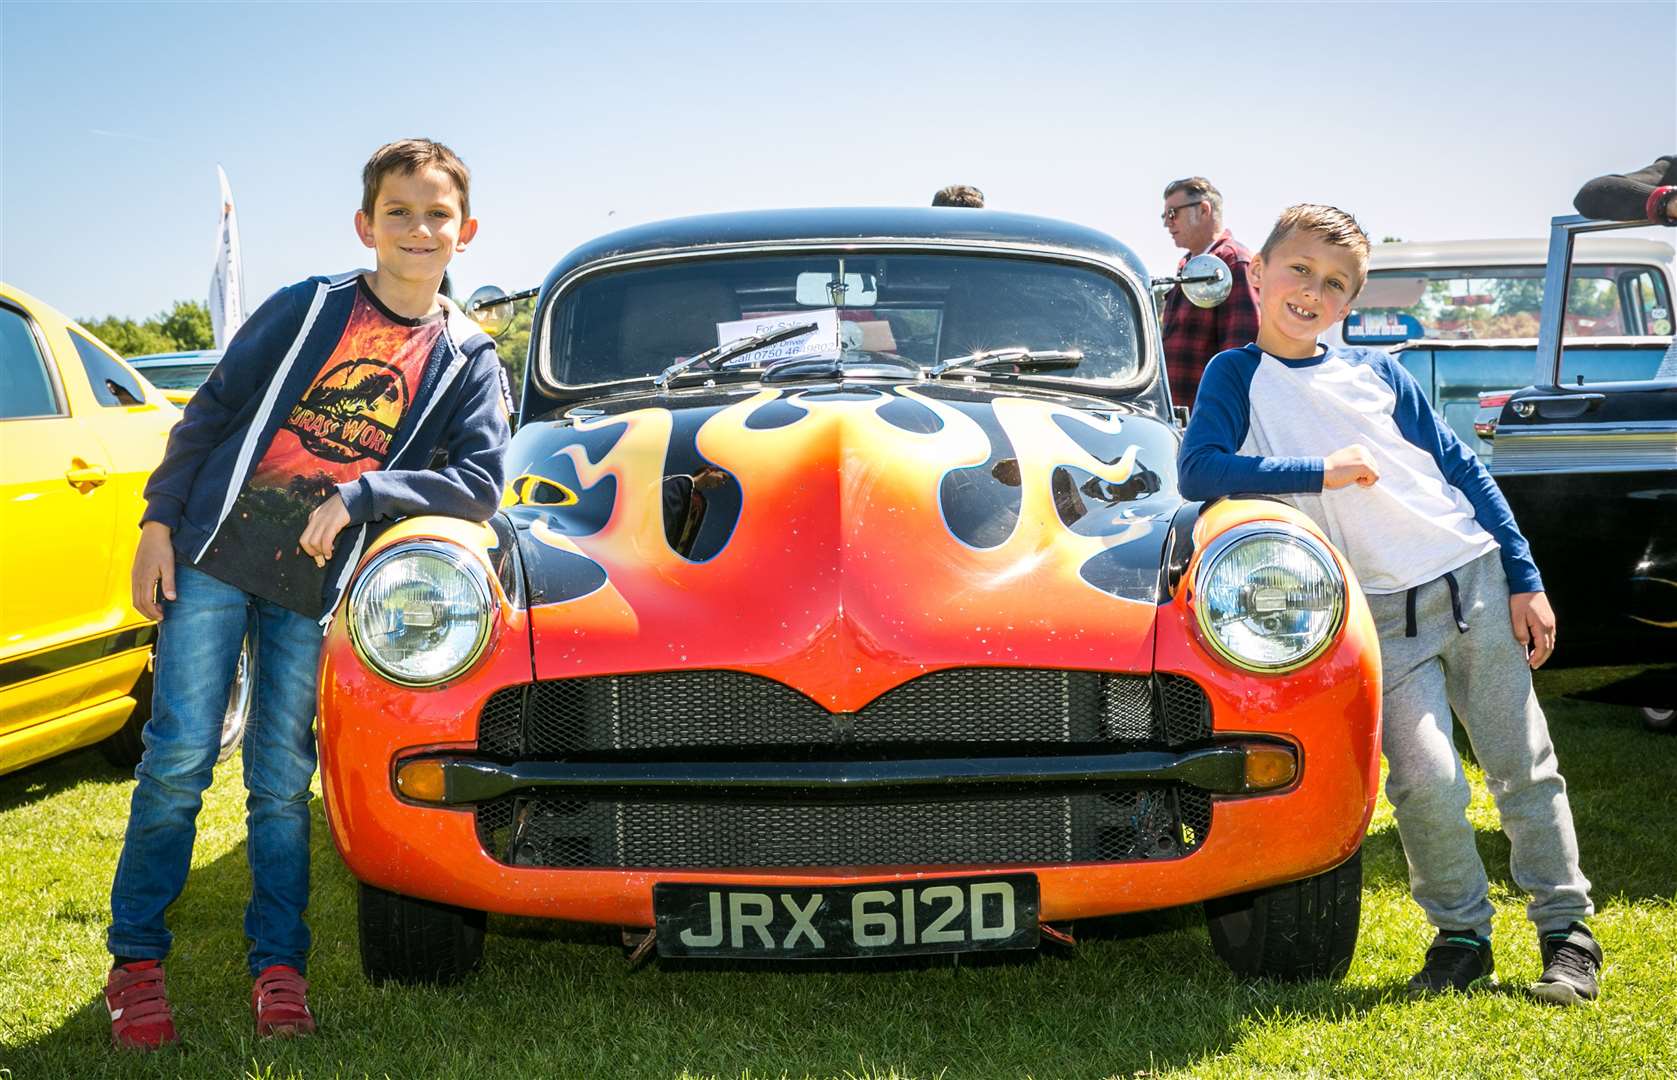 Isaac and Finley at this year's Motors by the Moat at Leeds Castle Picture: matthewwalkerphotography.com